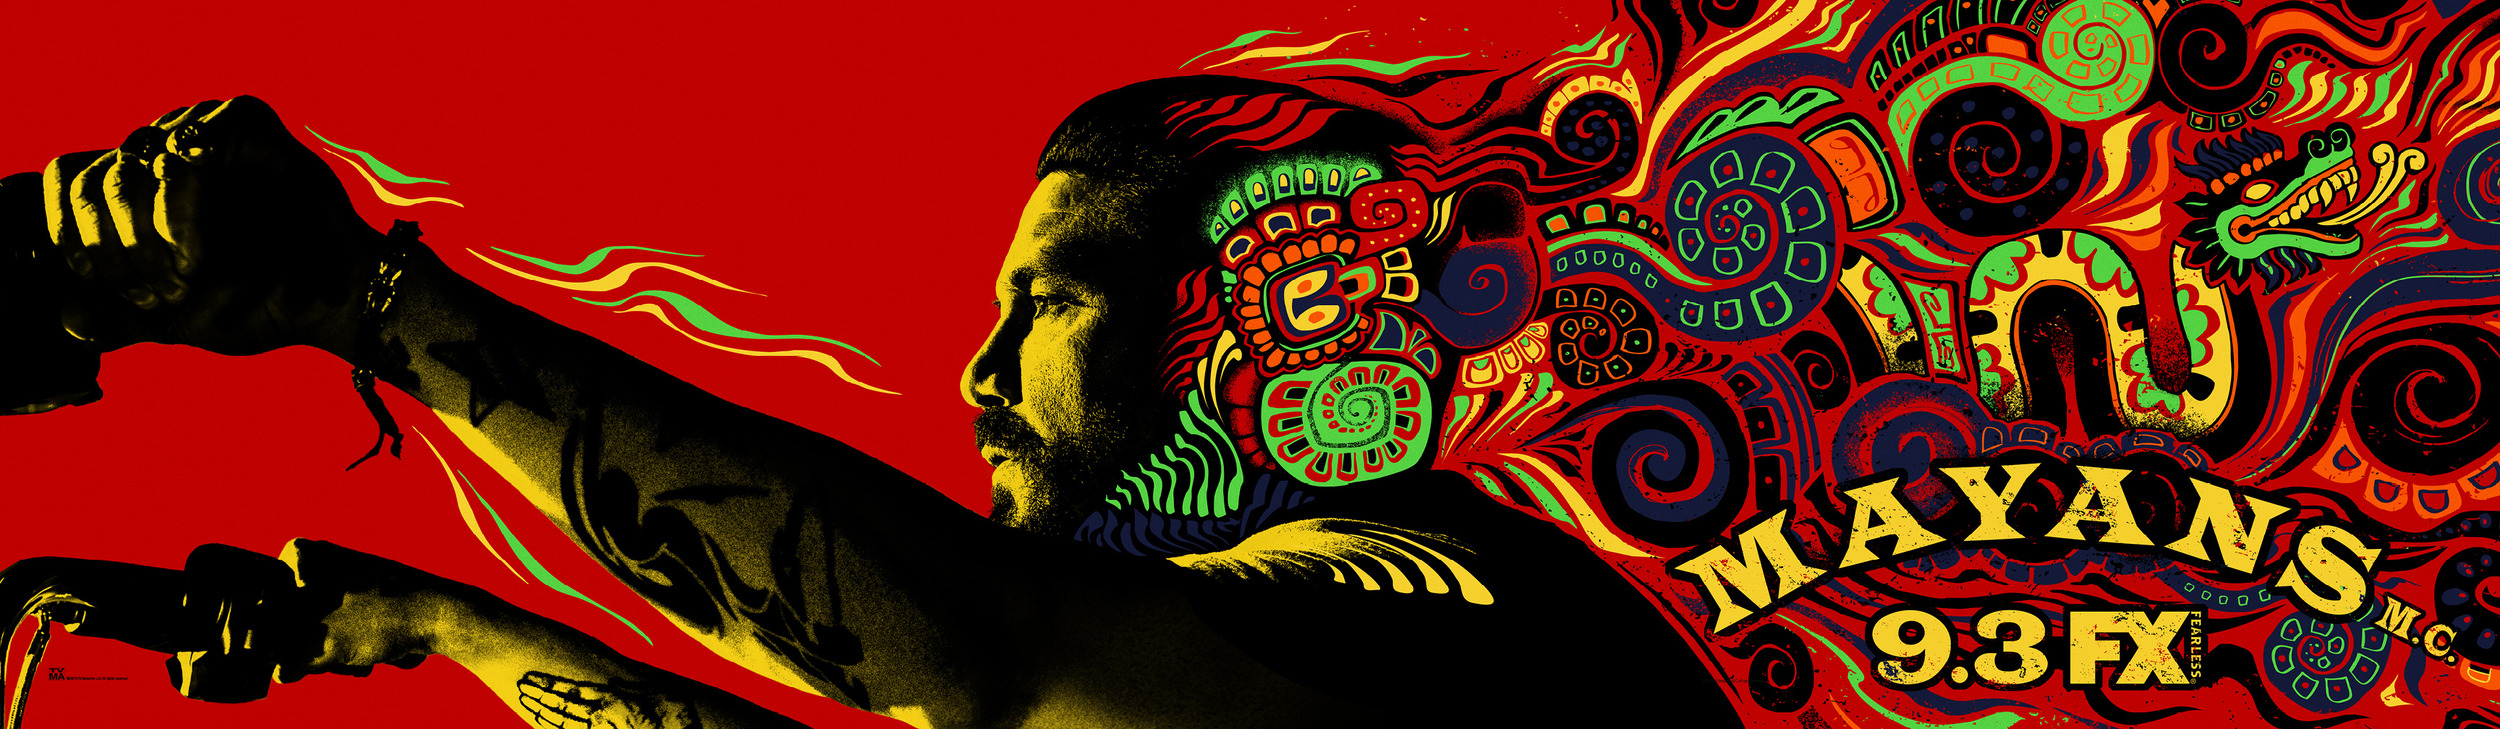 Mega Sized TV Poster Image for Mayans M.C. (#8 of 19)